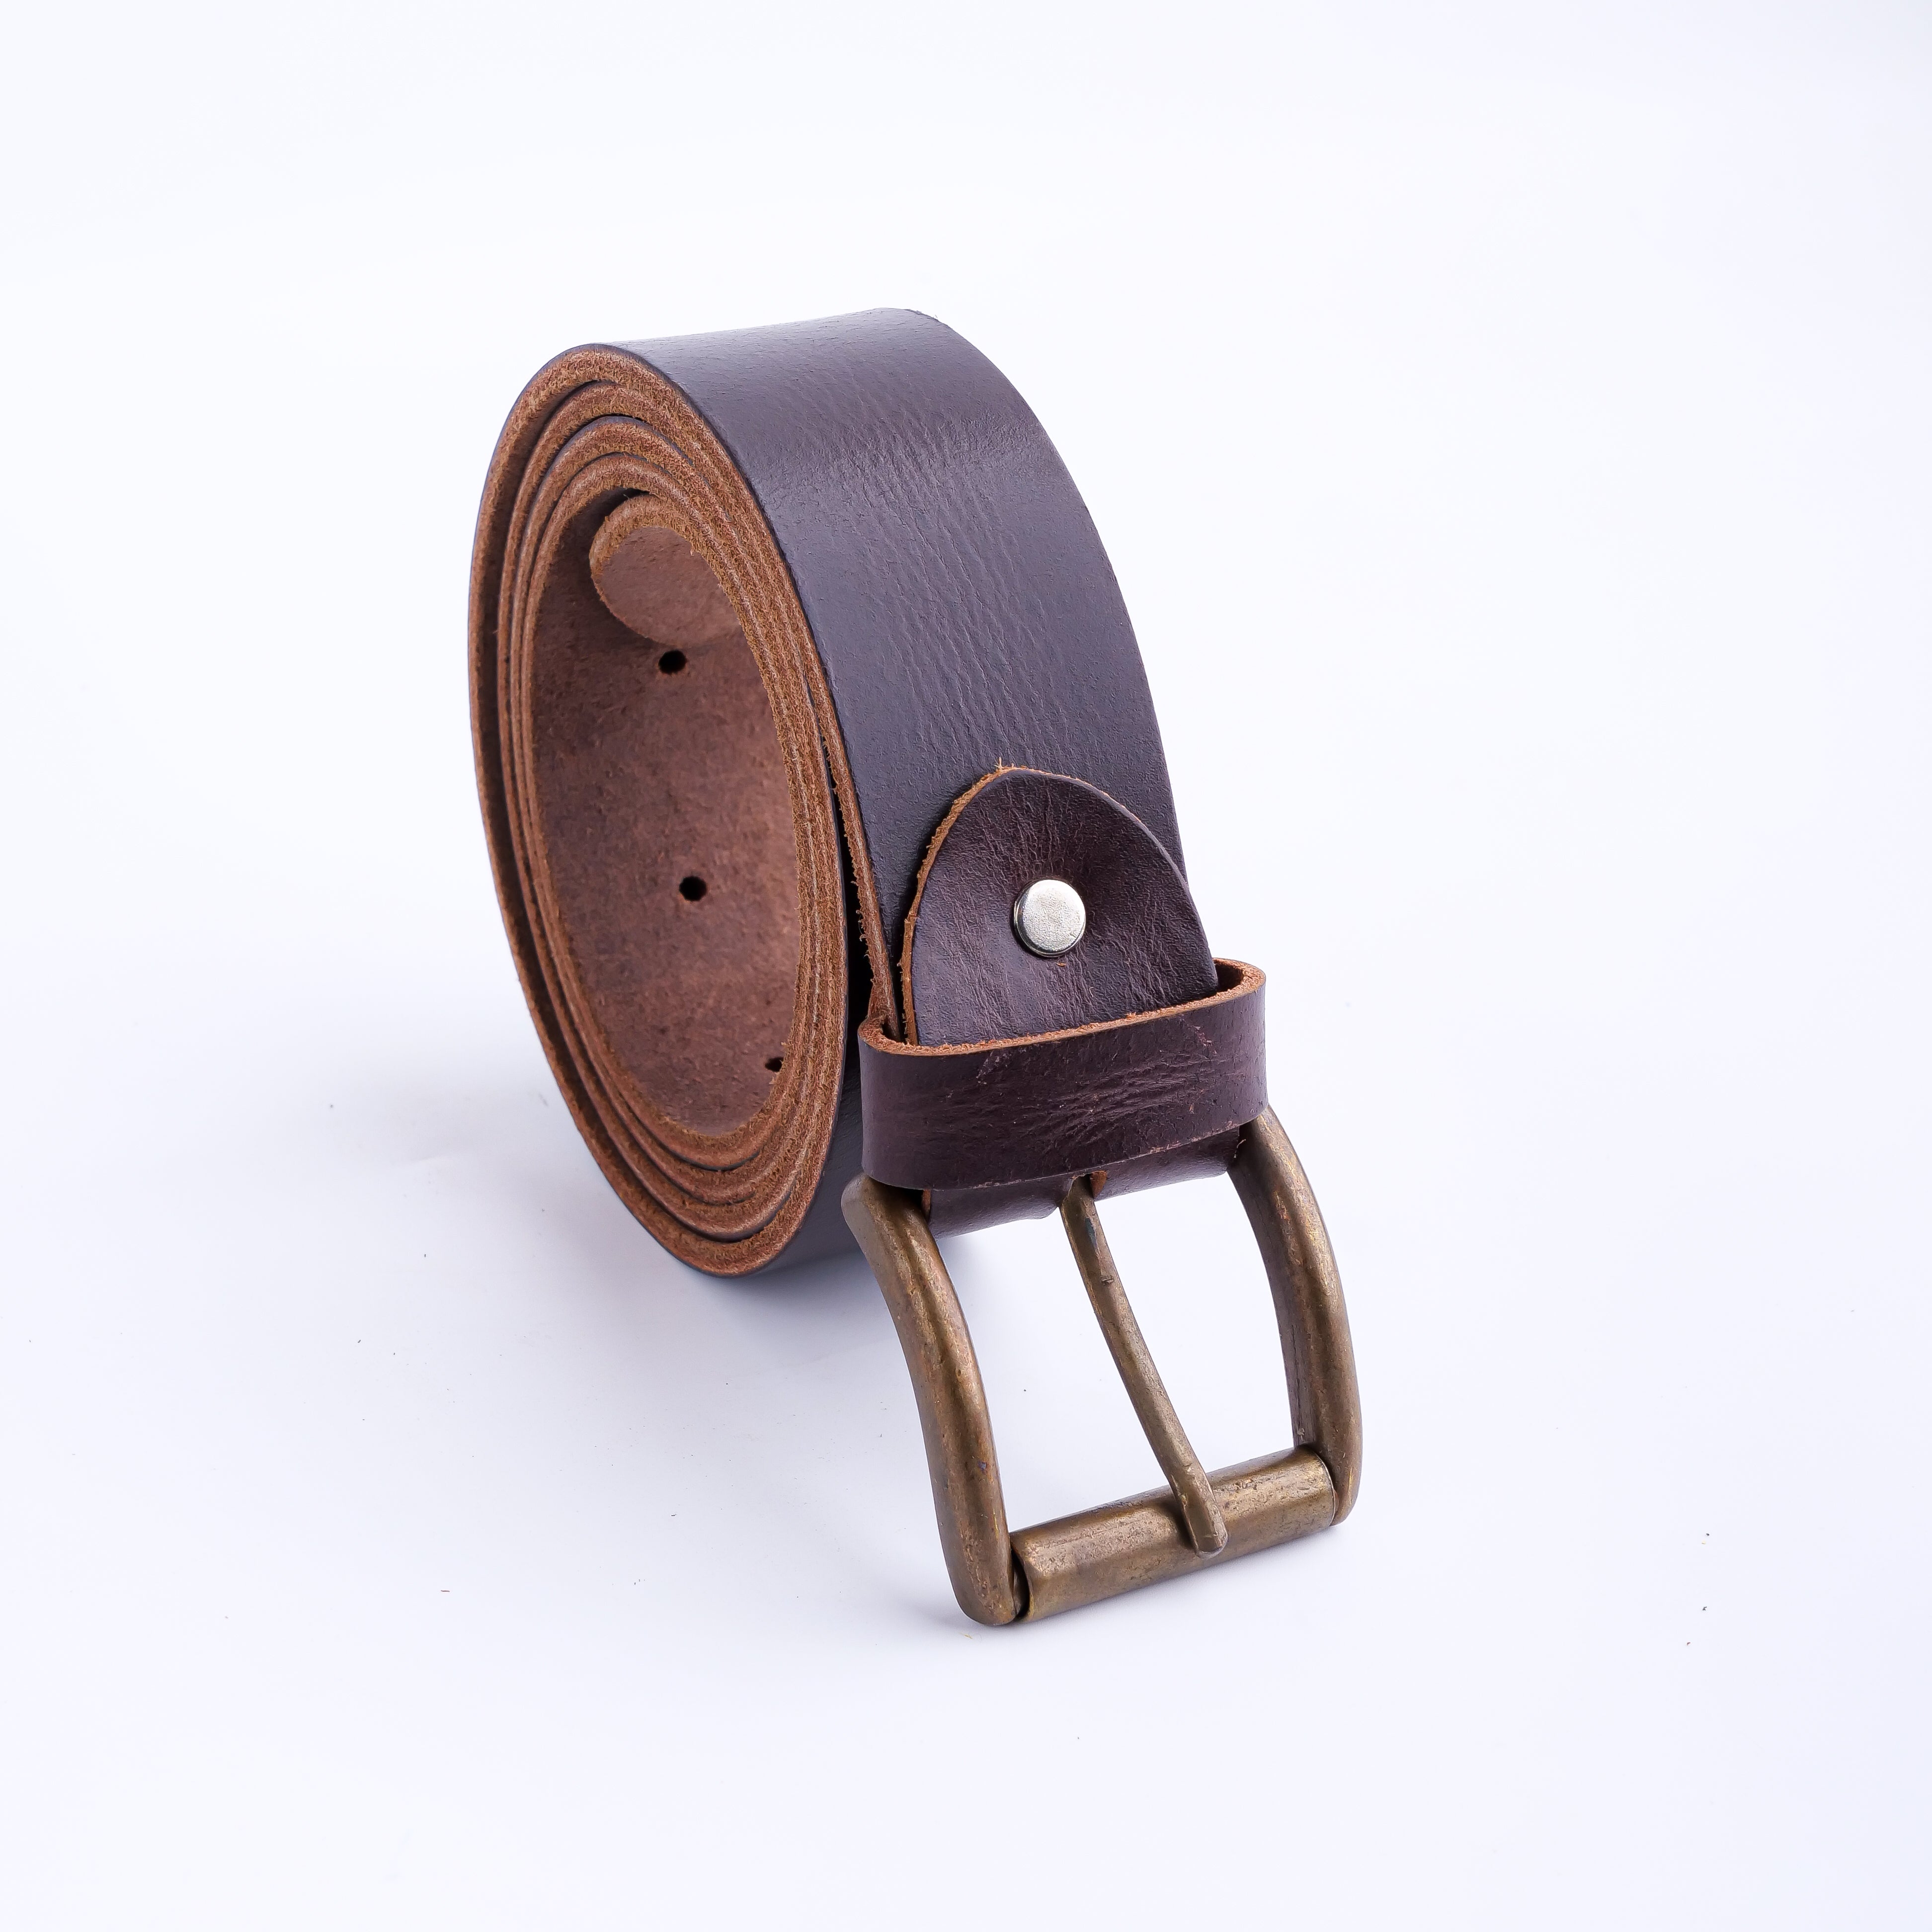 Rustic Leather Casual Jeans Belt For Men - Chocolate Brown